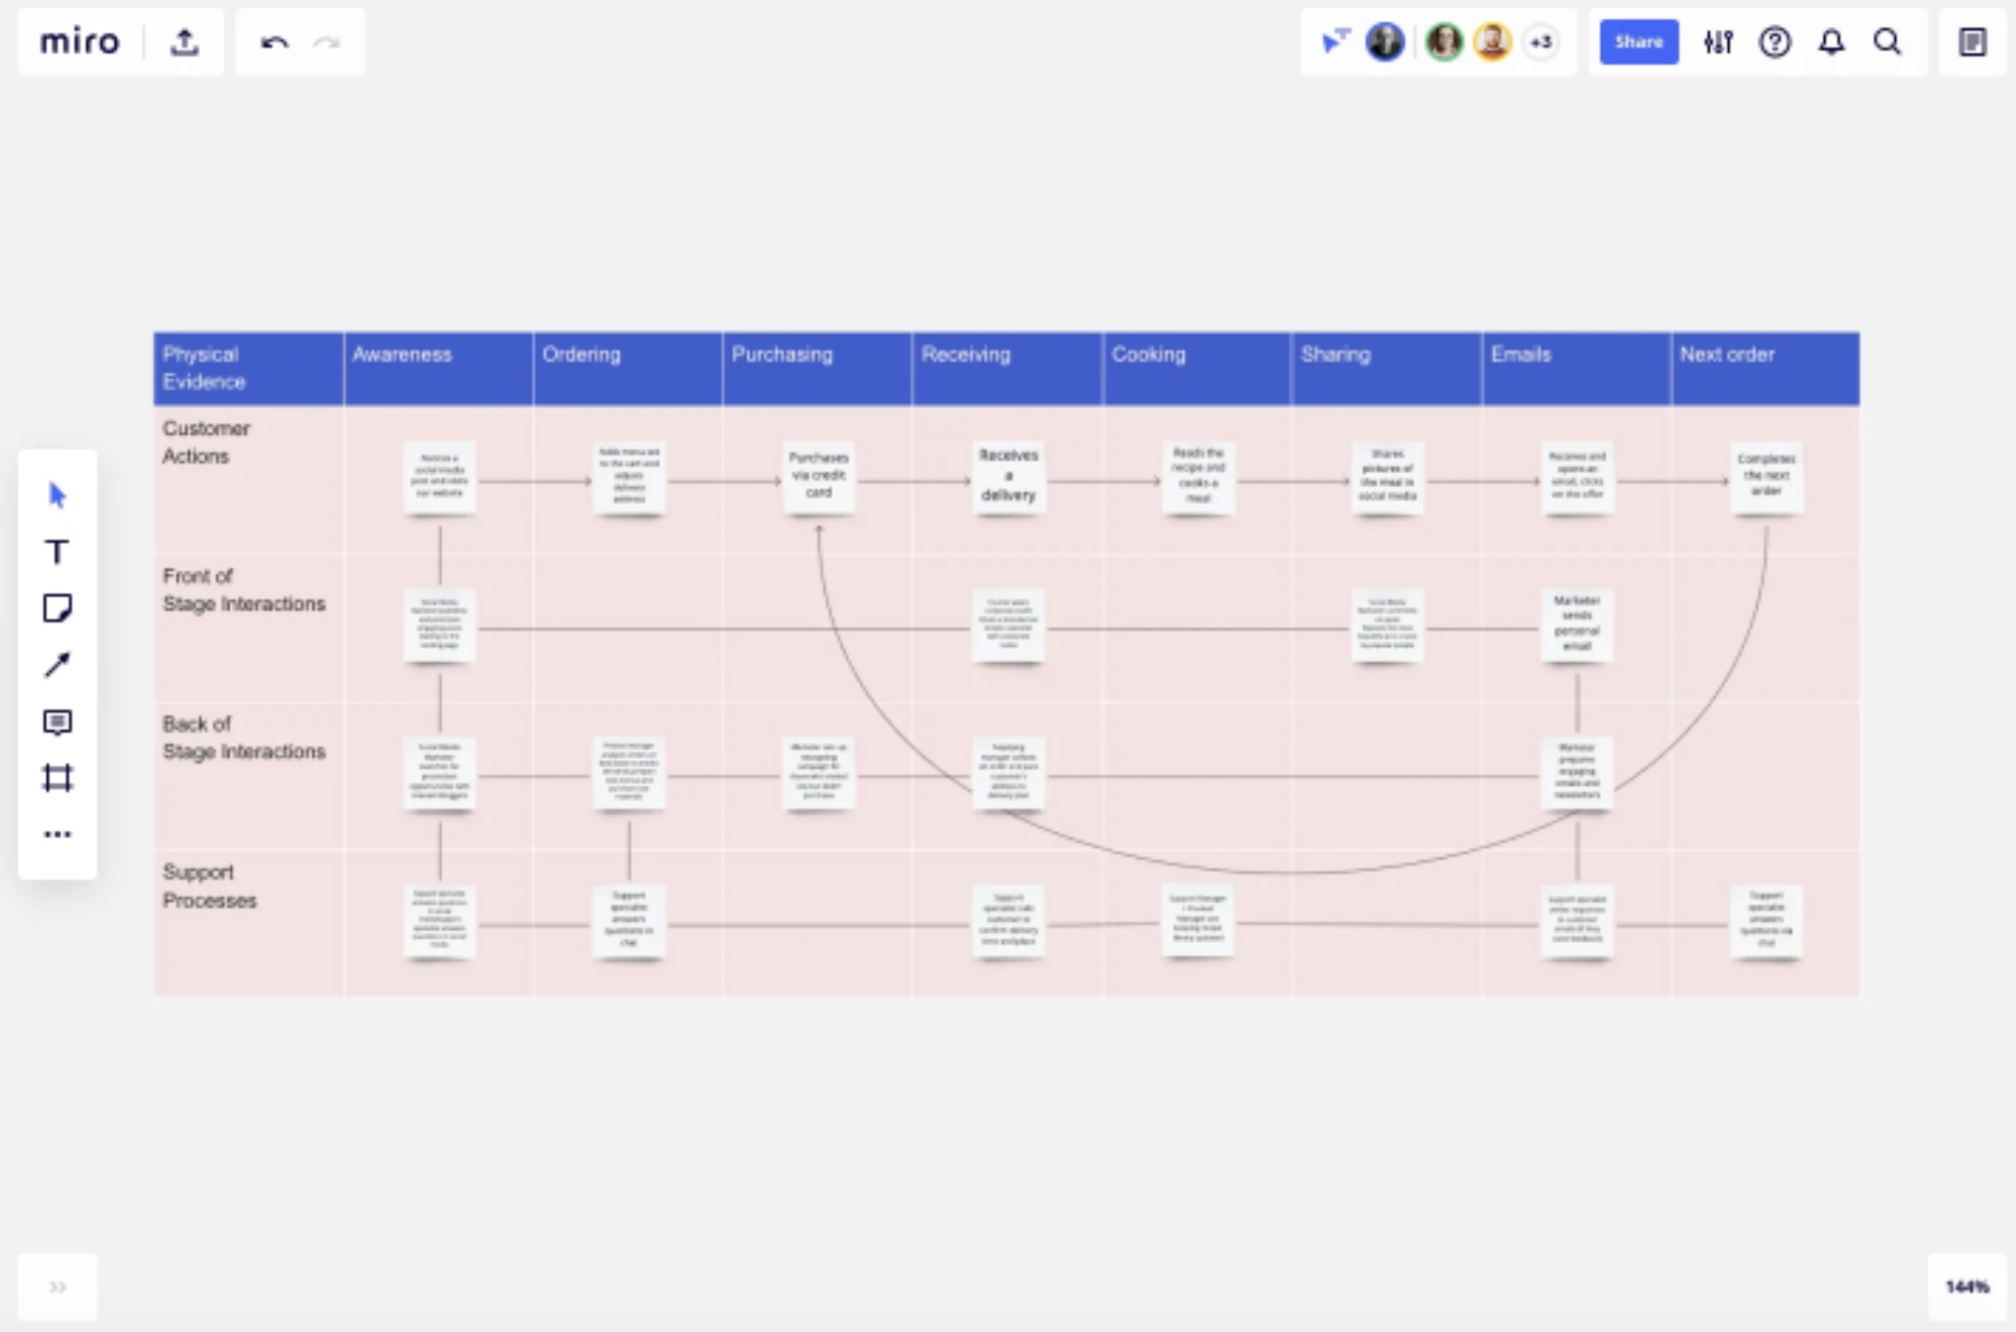 Another example of a service blueprint template by Miro.